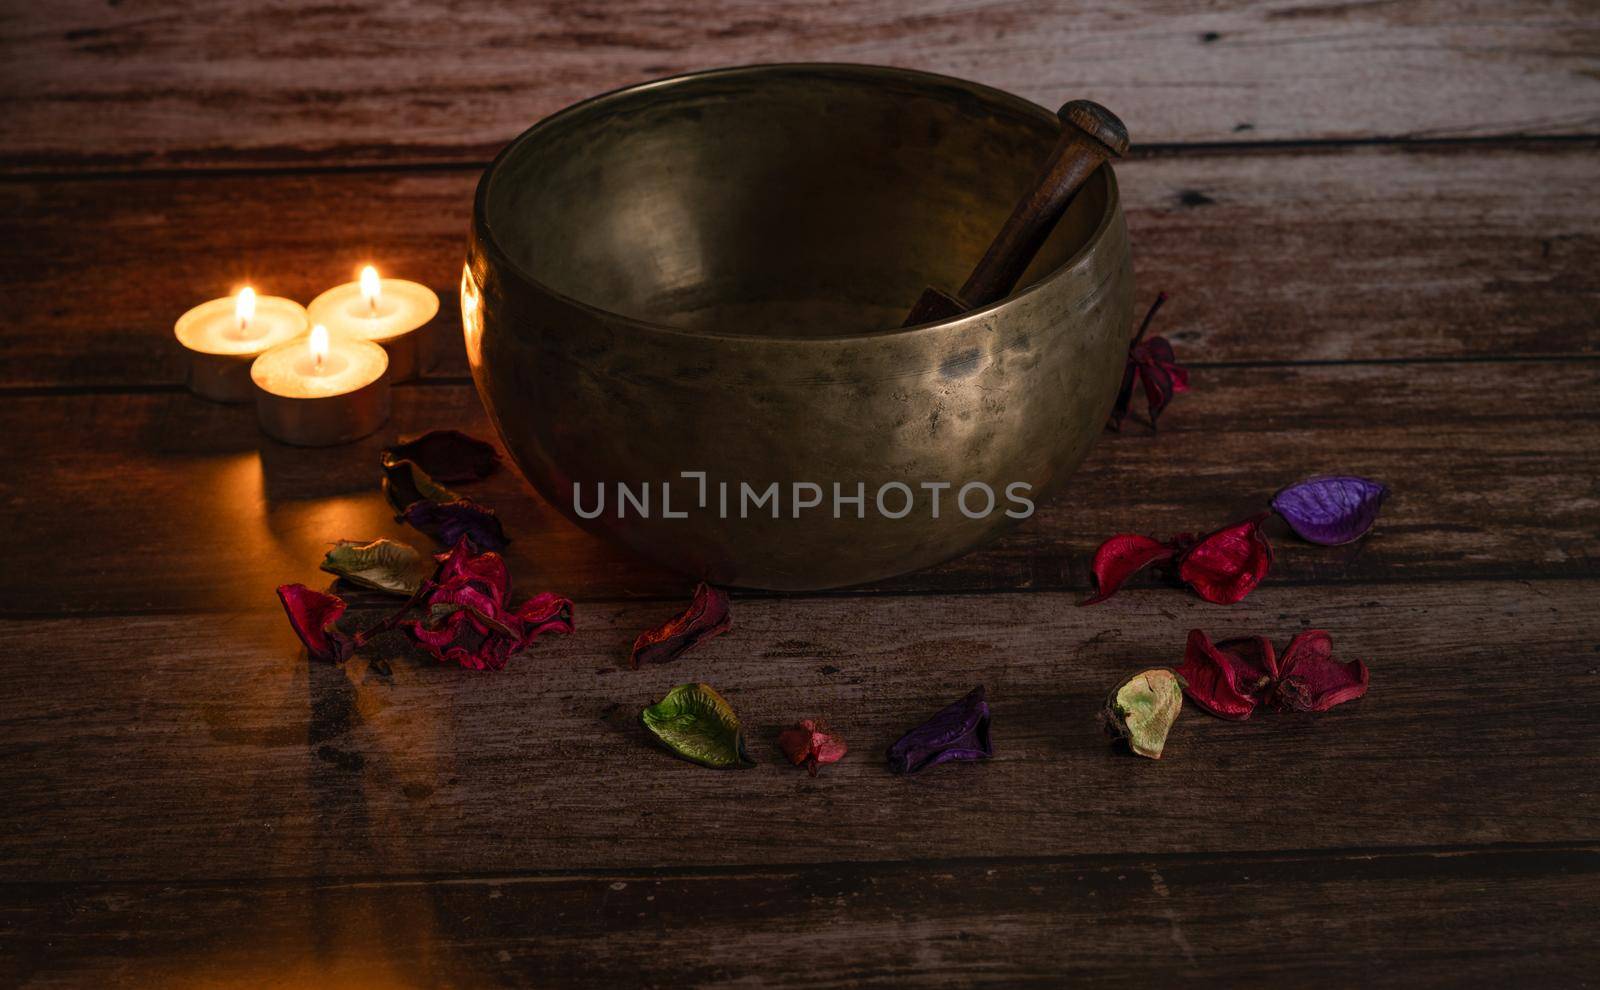 tibetan bowl with flower petals and candles by joseantona